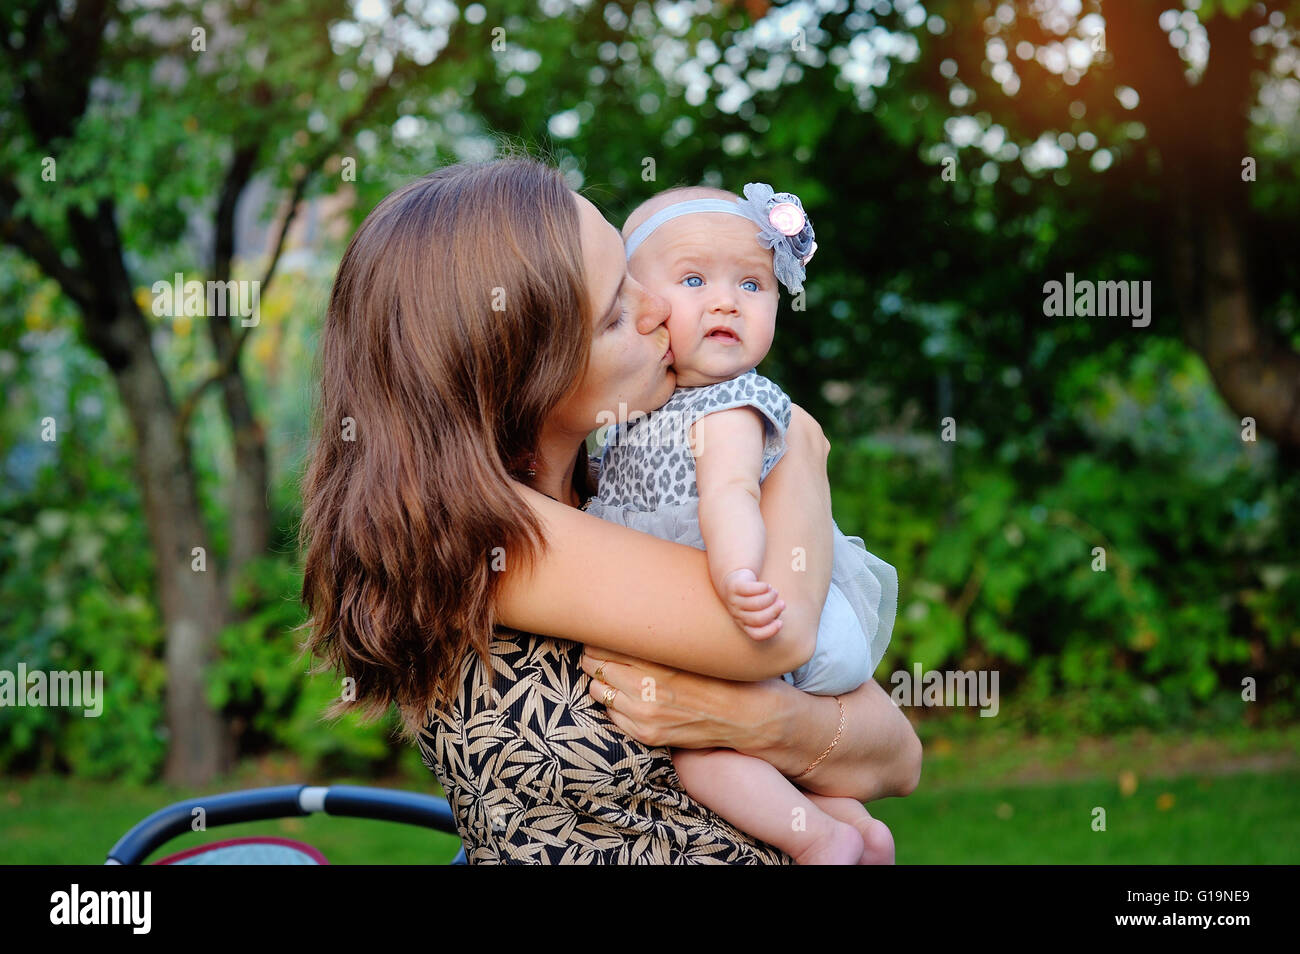 Portrait of happy mother and baby playing outdoors Banque D'Images